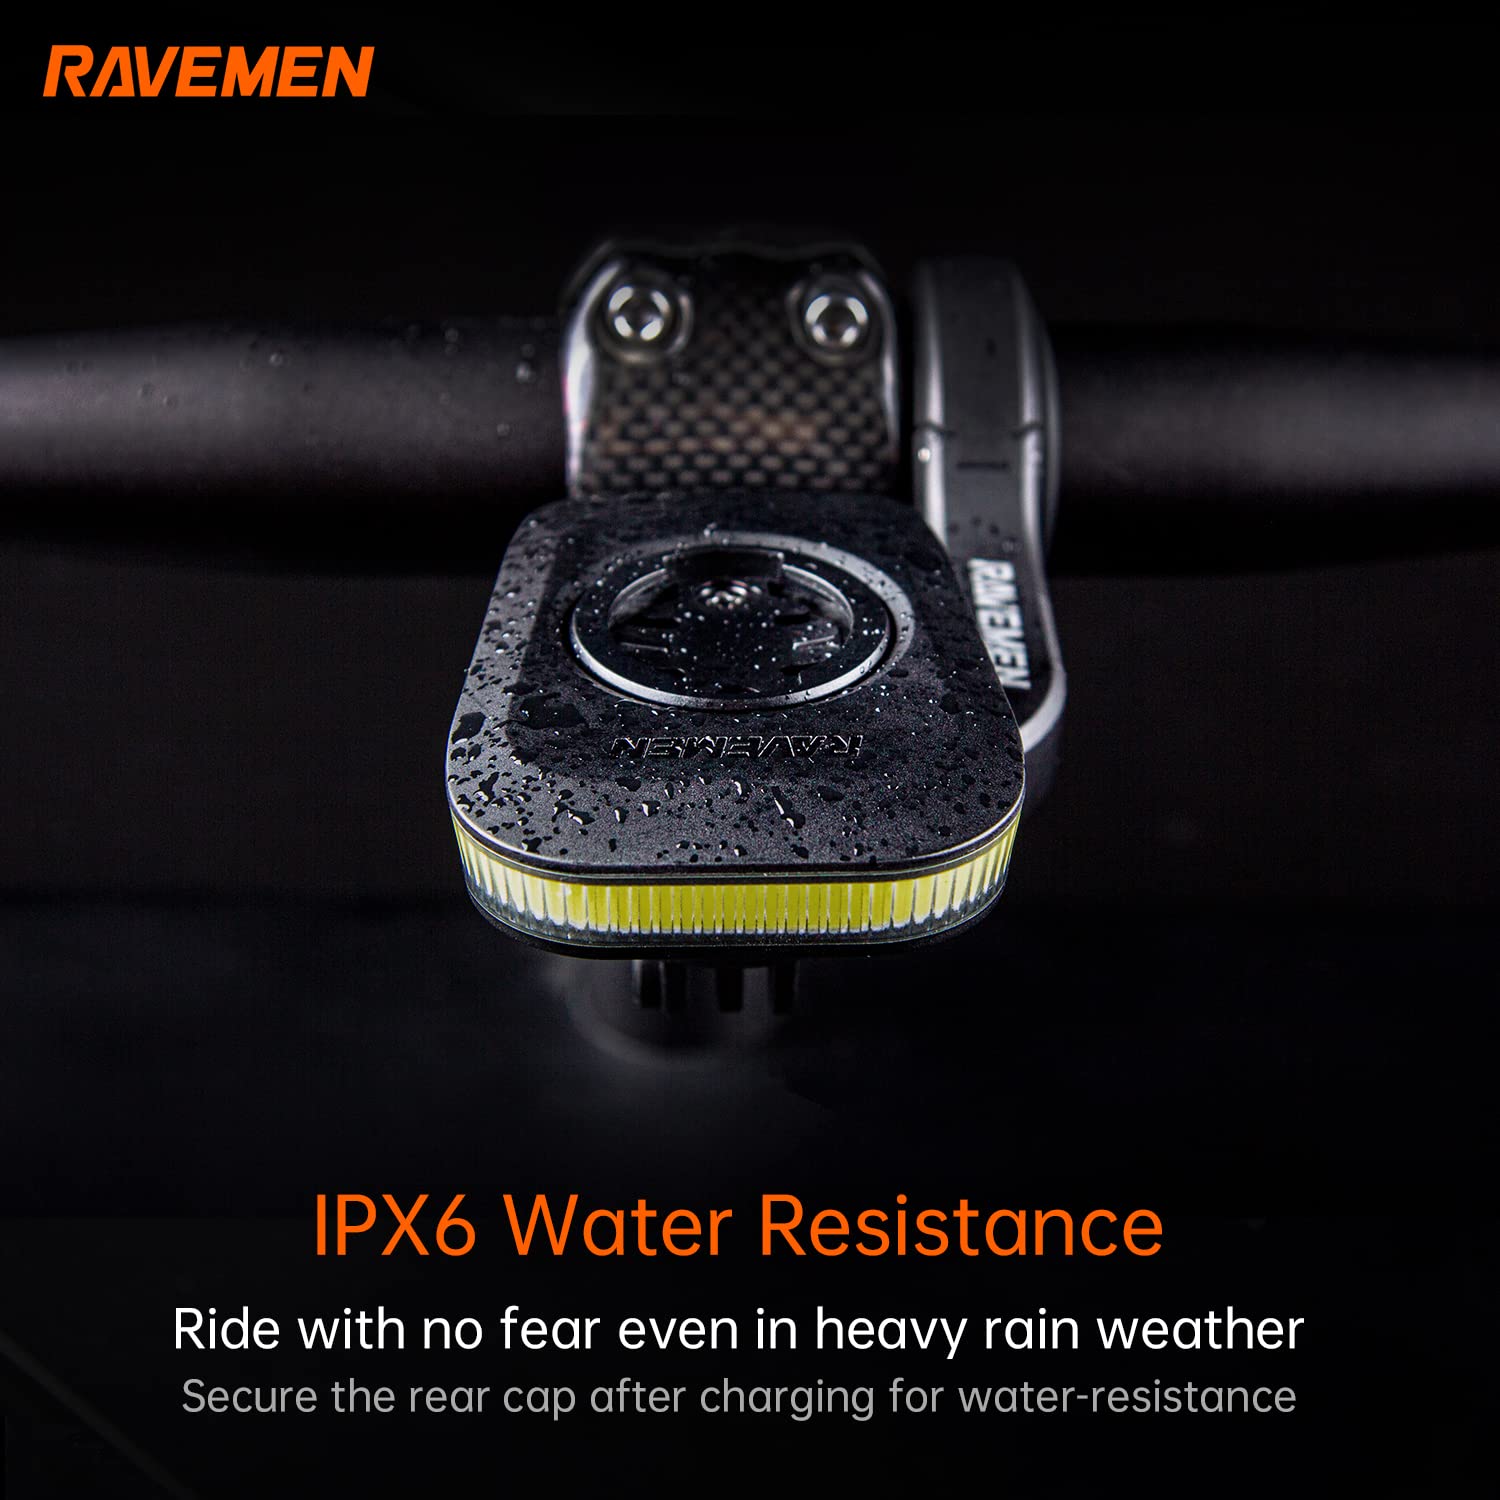 RAVEMEN FR160 Daylight Compatible with Garmin/Wahoo Bike Computer, IPX6 Waterproof Bike Light with Side Visibility Warning Flash Light 6 Light Modes for Riding Safety (Patent Protected)